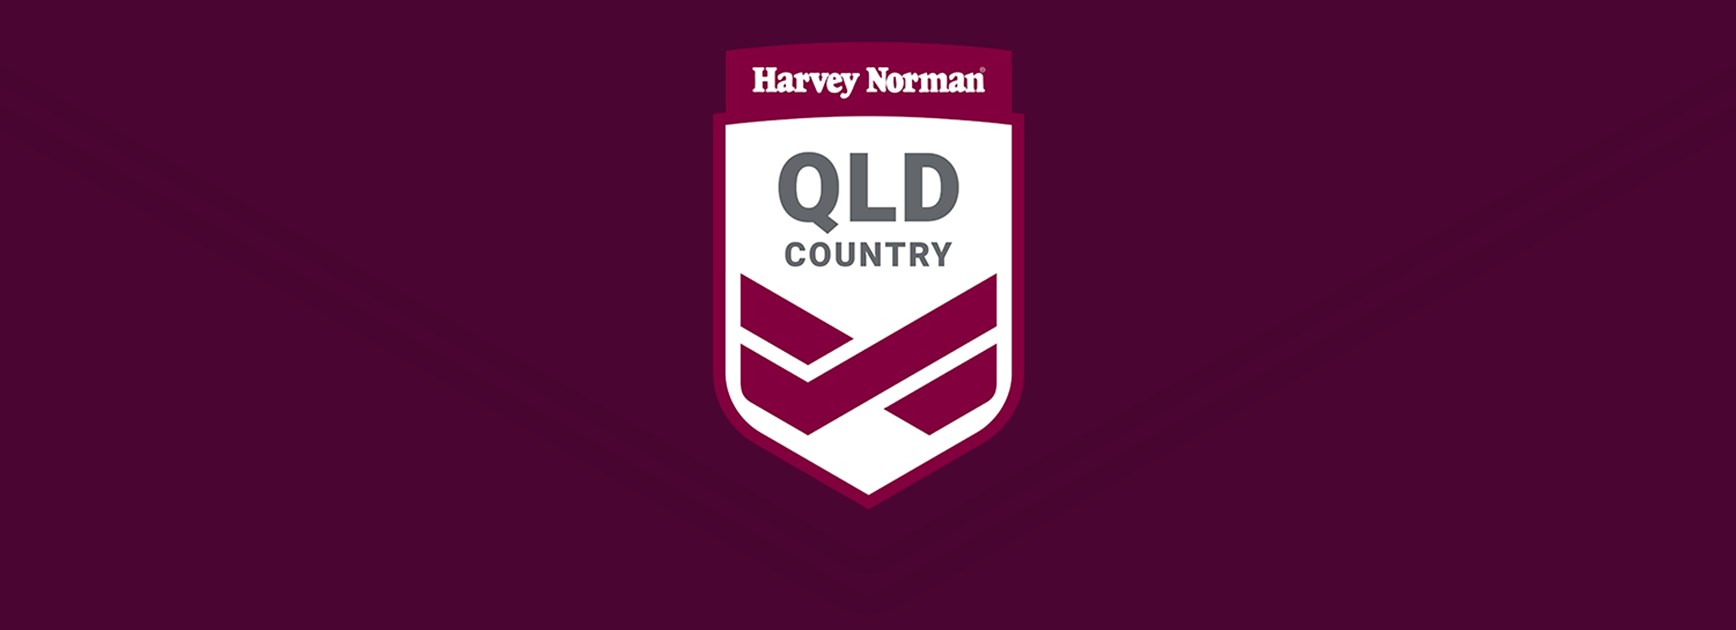 Harvey Norman Queensland Country team announced